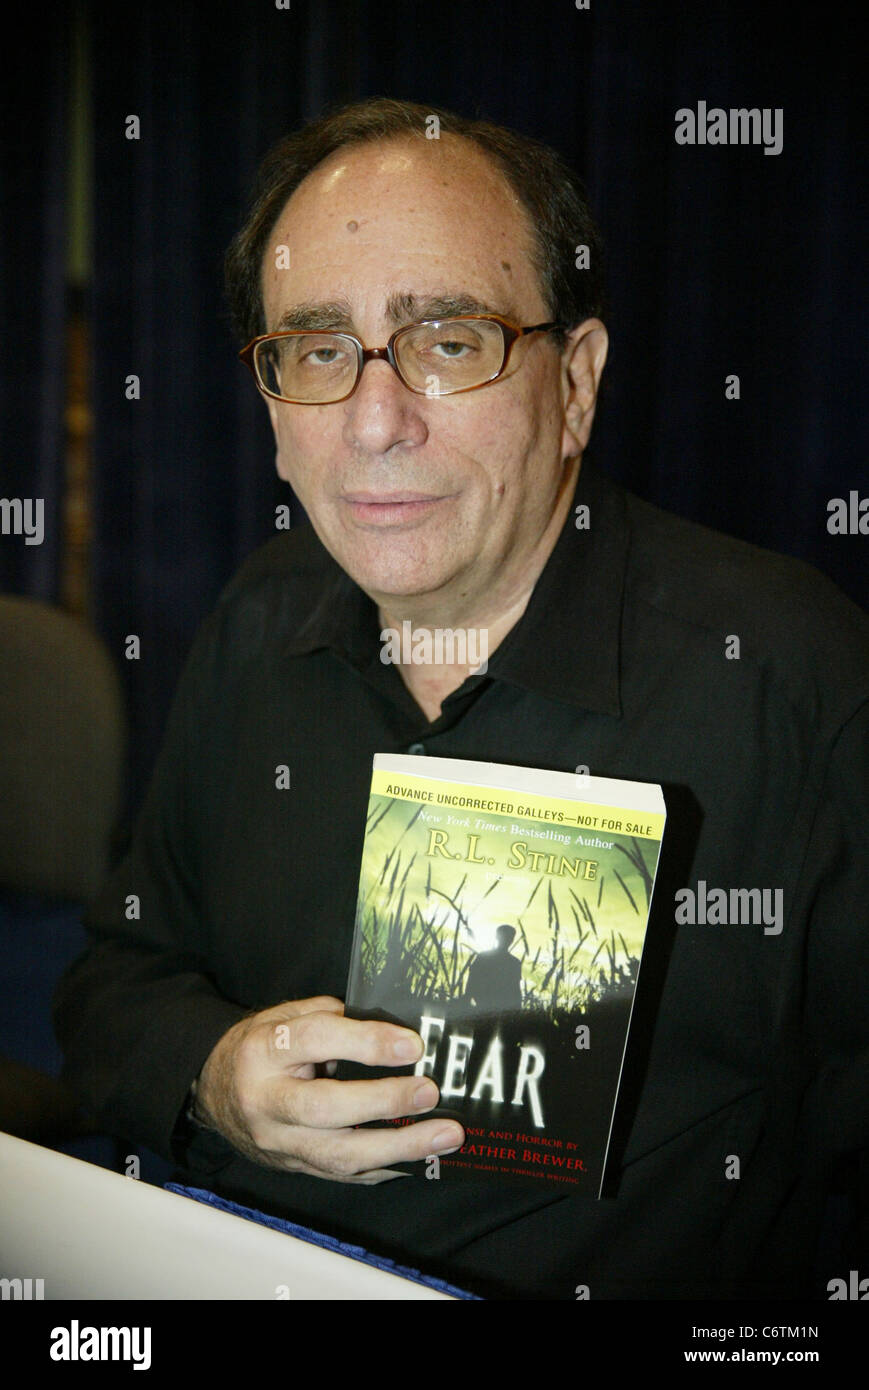 RL Stine BEA (Book Expo America) 2010 Day Two held at the Jacob Javits Center New York City, USA 0 27.05.10 Stock Photo